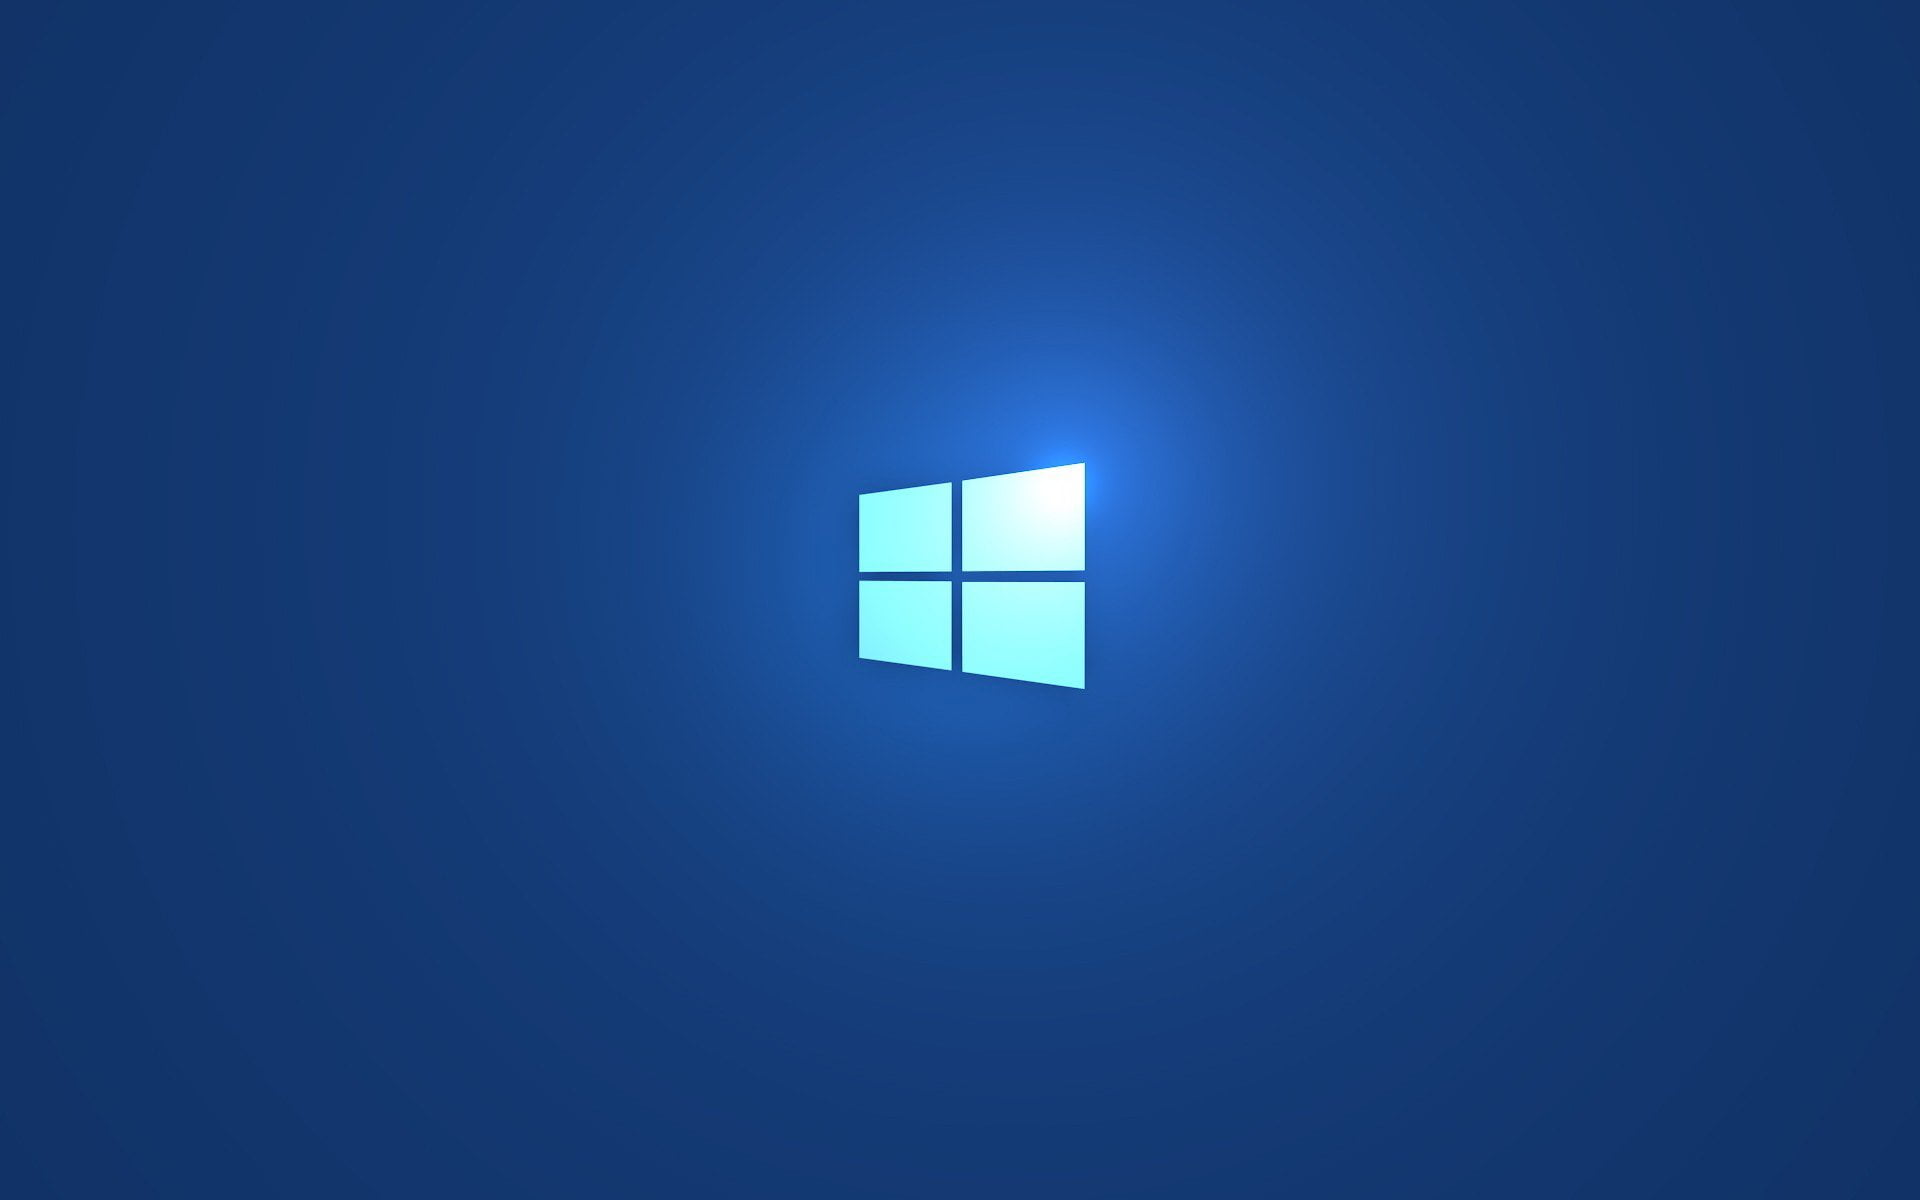 Windows, Windows 8.1, copy space, blue, low angle view, no people